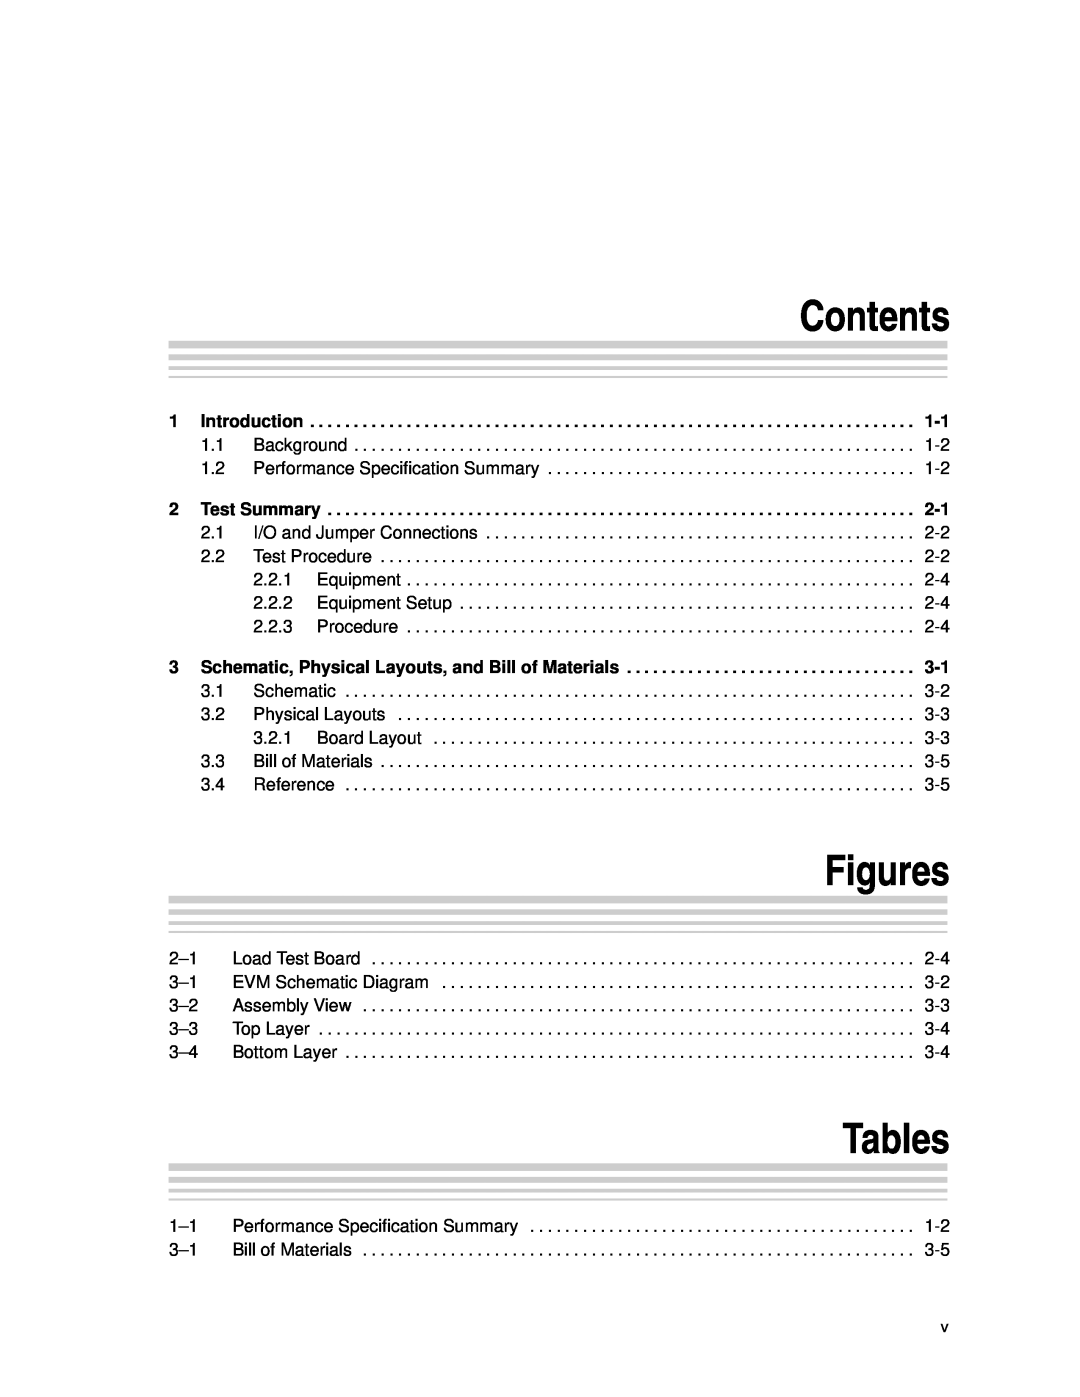 Texas Instruments bq24010/2 manual Contents, Figures, Tables, Introduction, Test Summary 